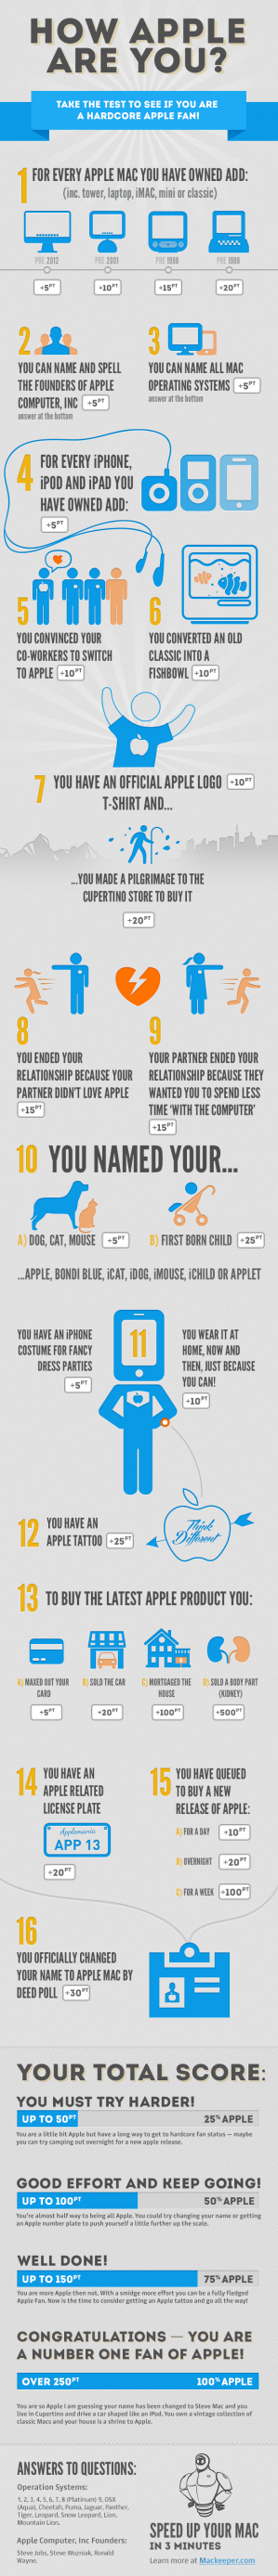 how apple are you infographic quiz